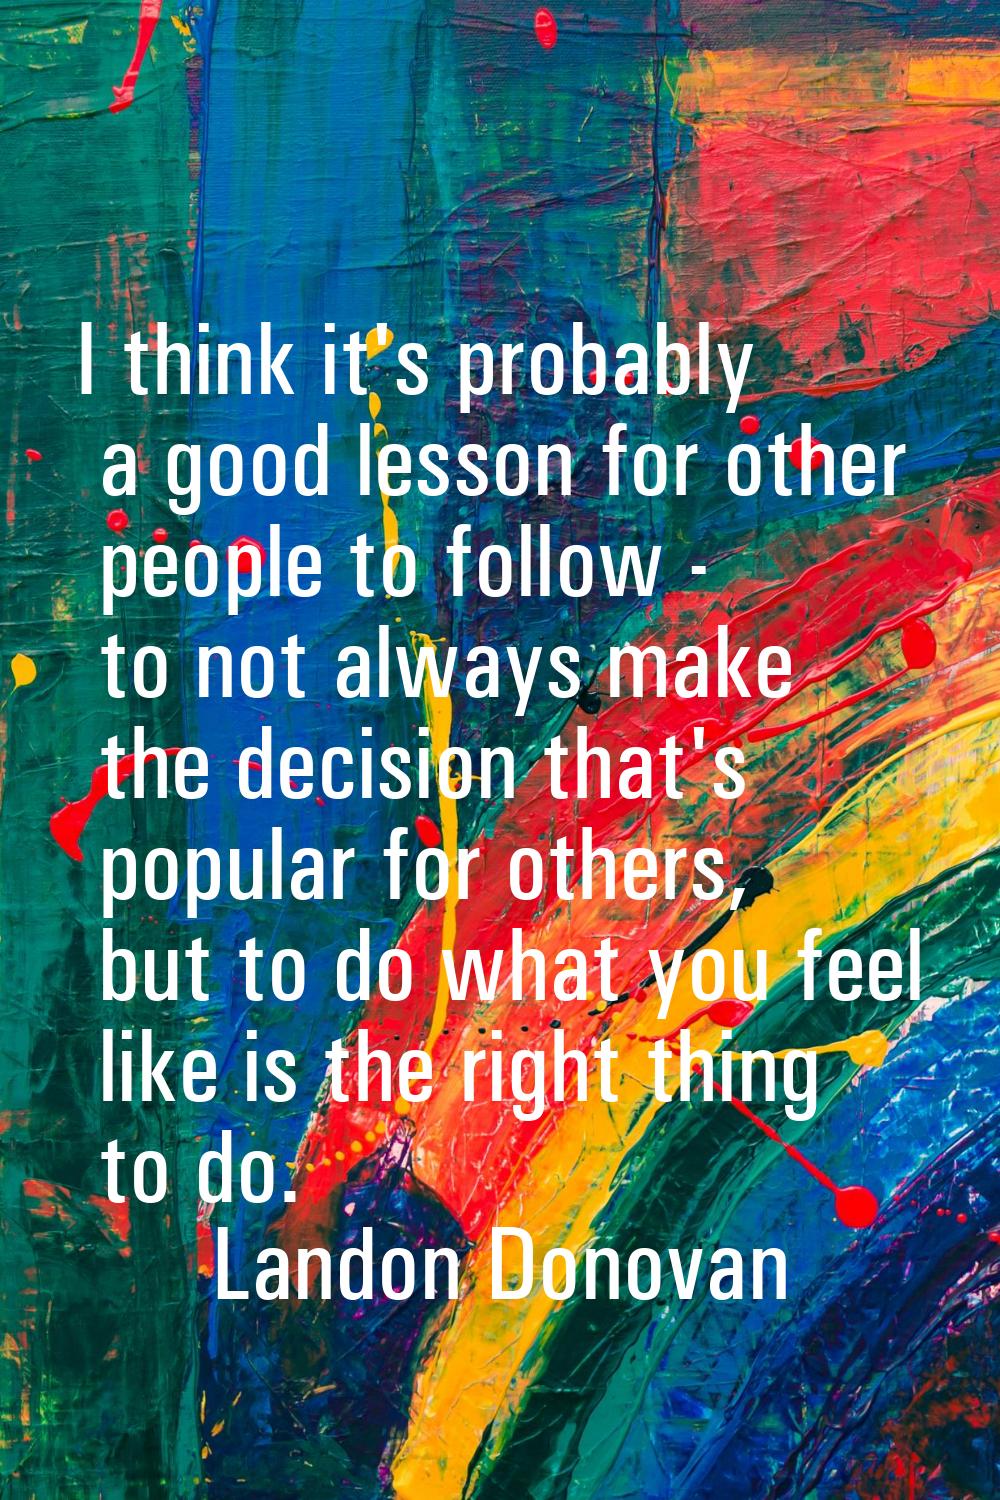 I think it's probably a good lesson for other people to follow - to not always make the decision th